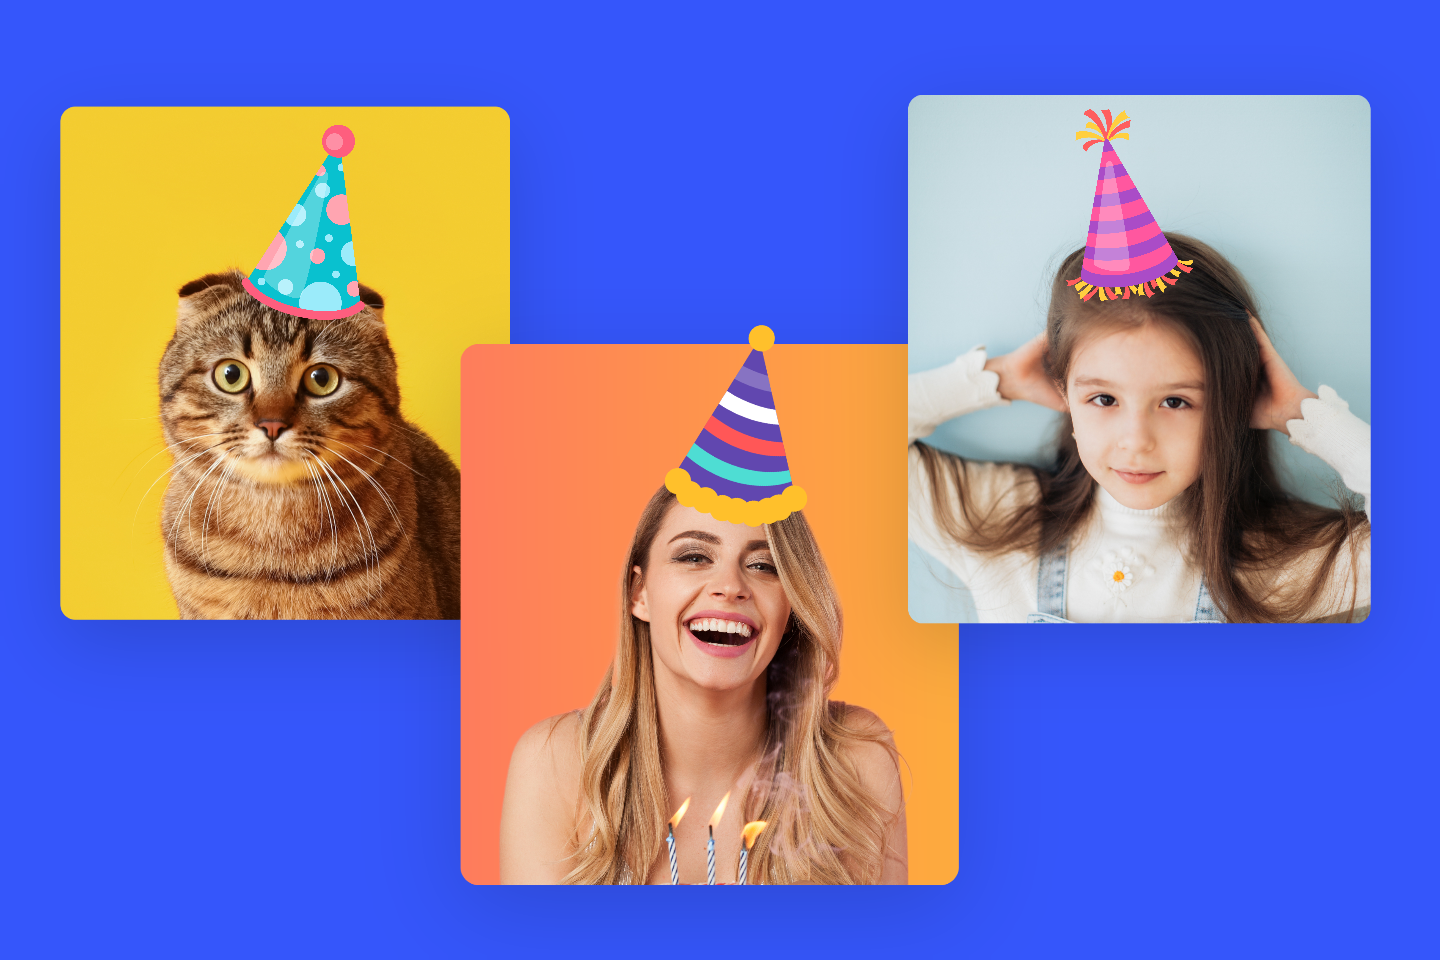 Add various styles and colors of birthday hats to a cat girl and kid